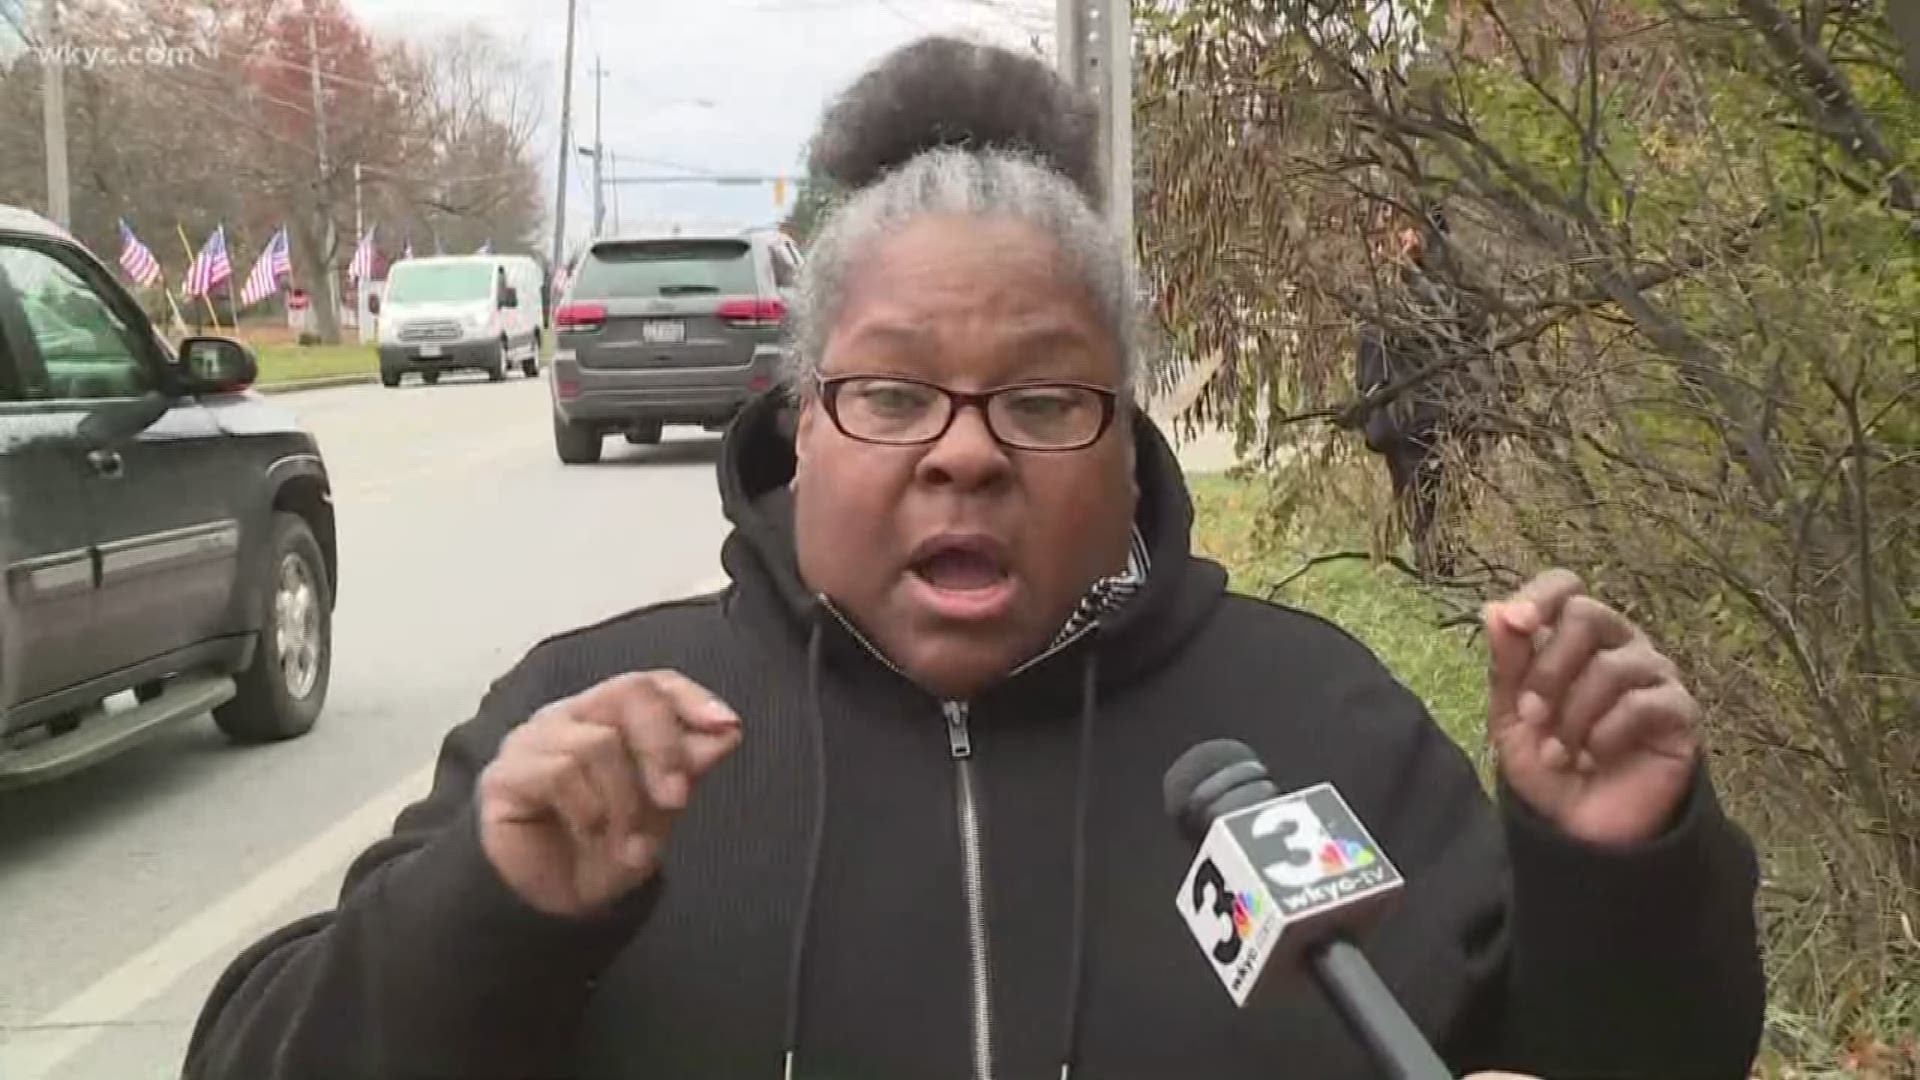 Nov. 13, 2018: A woman tells us she has been in contact with family members who are inside as a lockdown is underway at the Cleveland Clinic Medina Hospital.